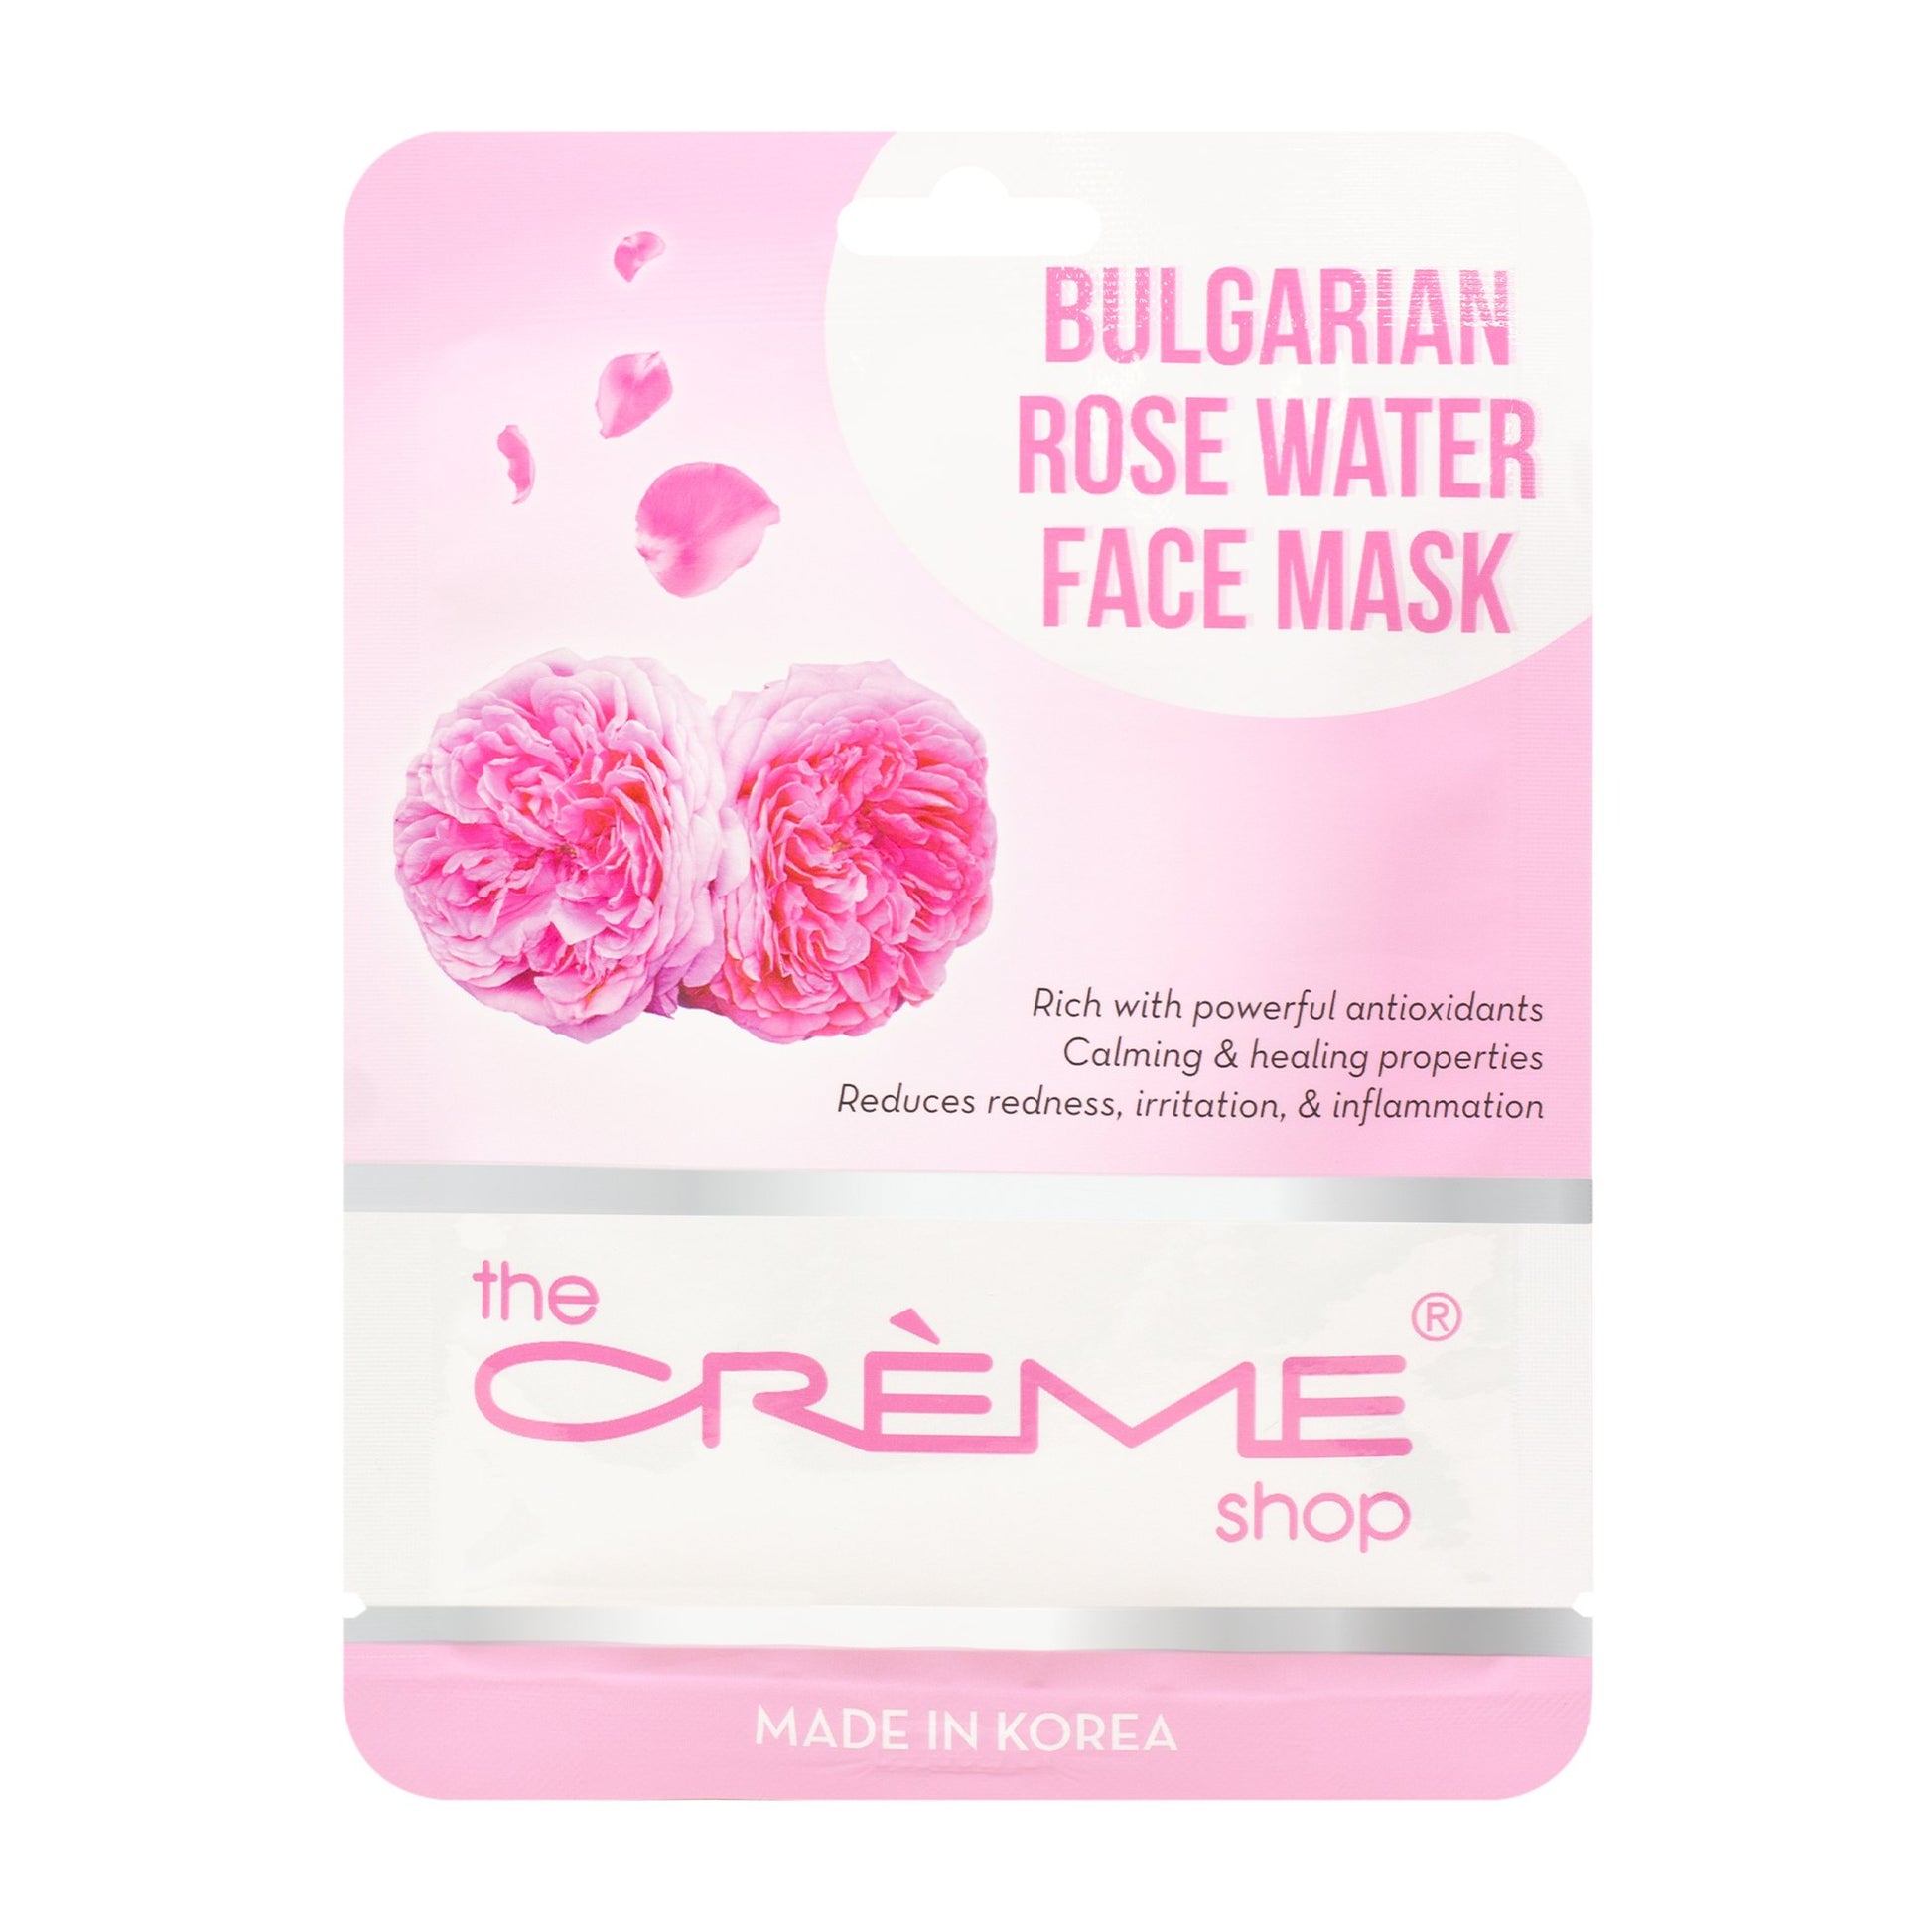 Bulgarian Rose Water Face Mask - The Crème Shop